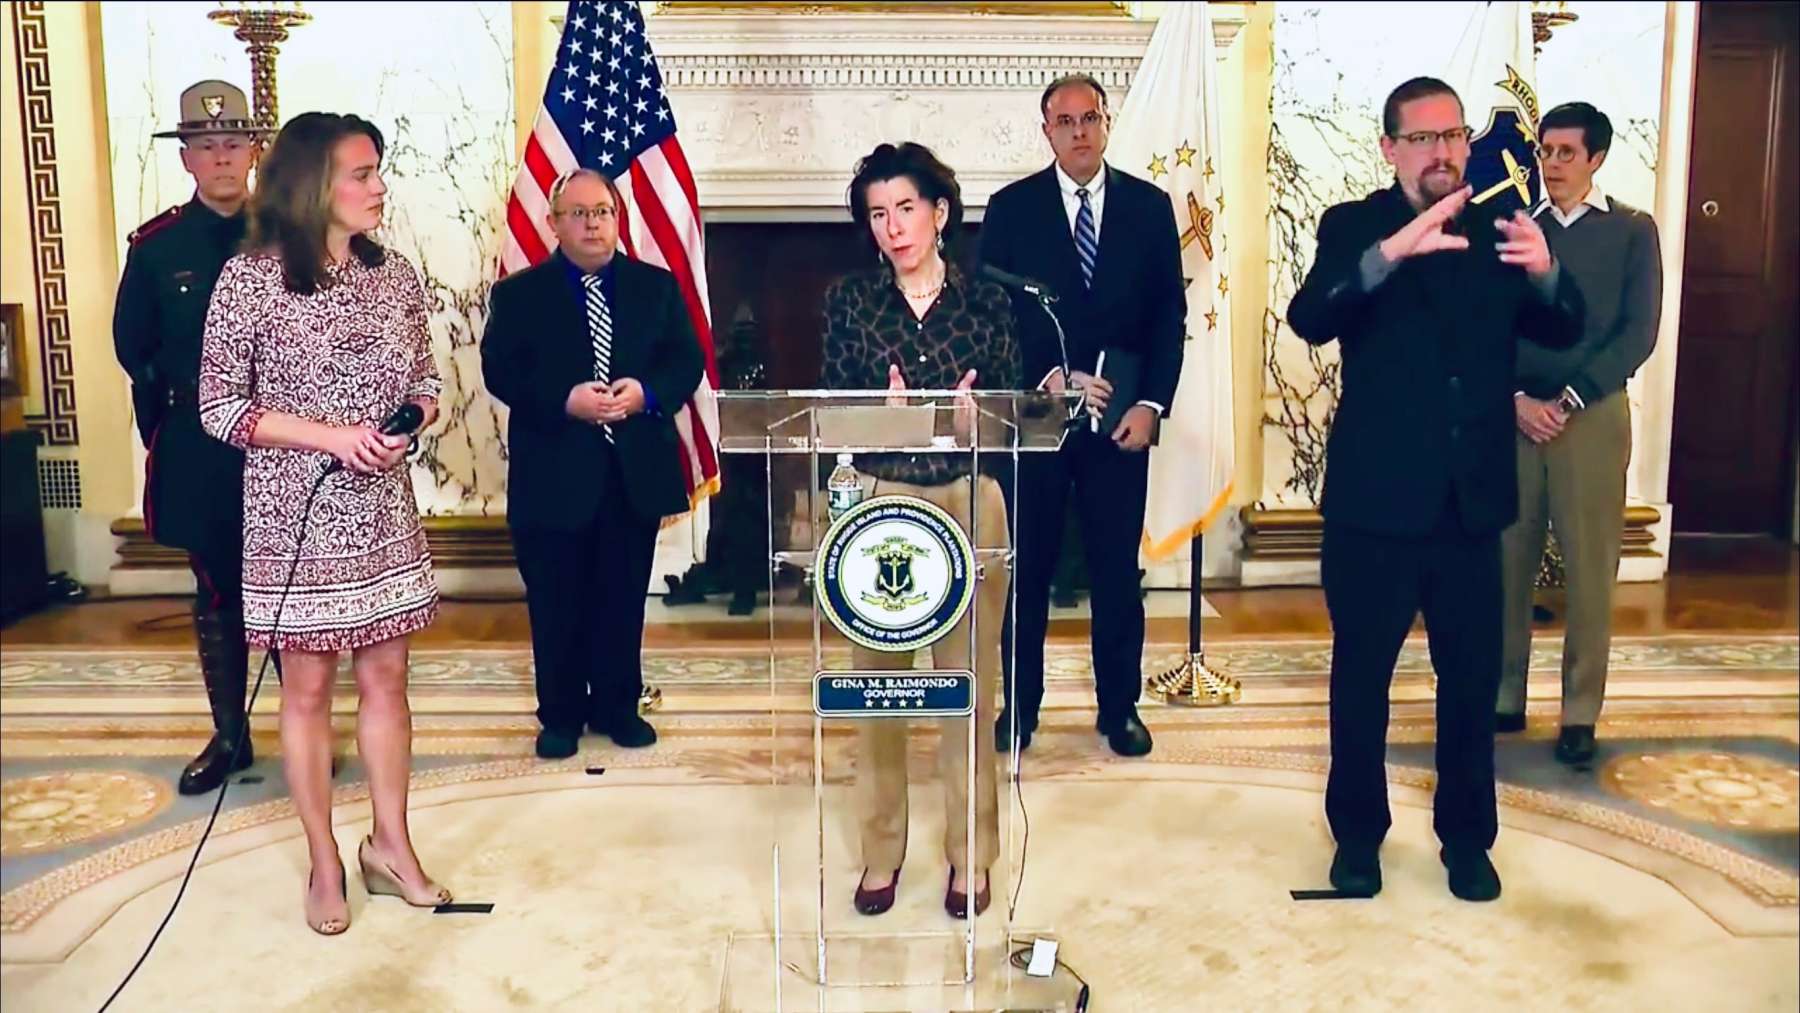 Governor Raimondo takes the high road in disagreement with Cuomo